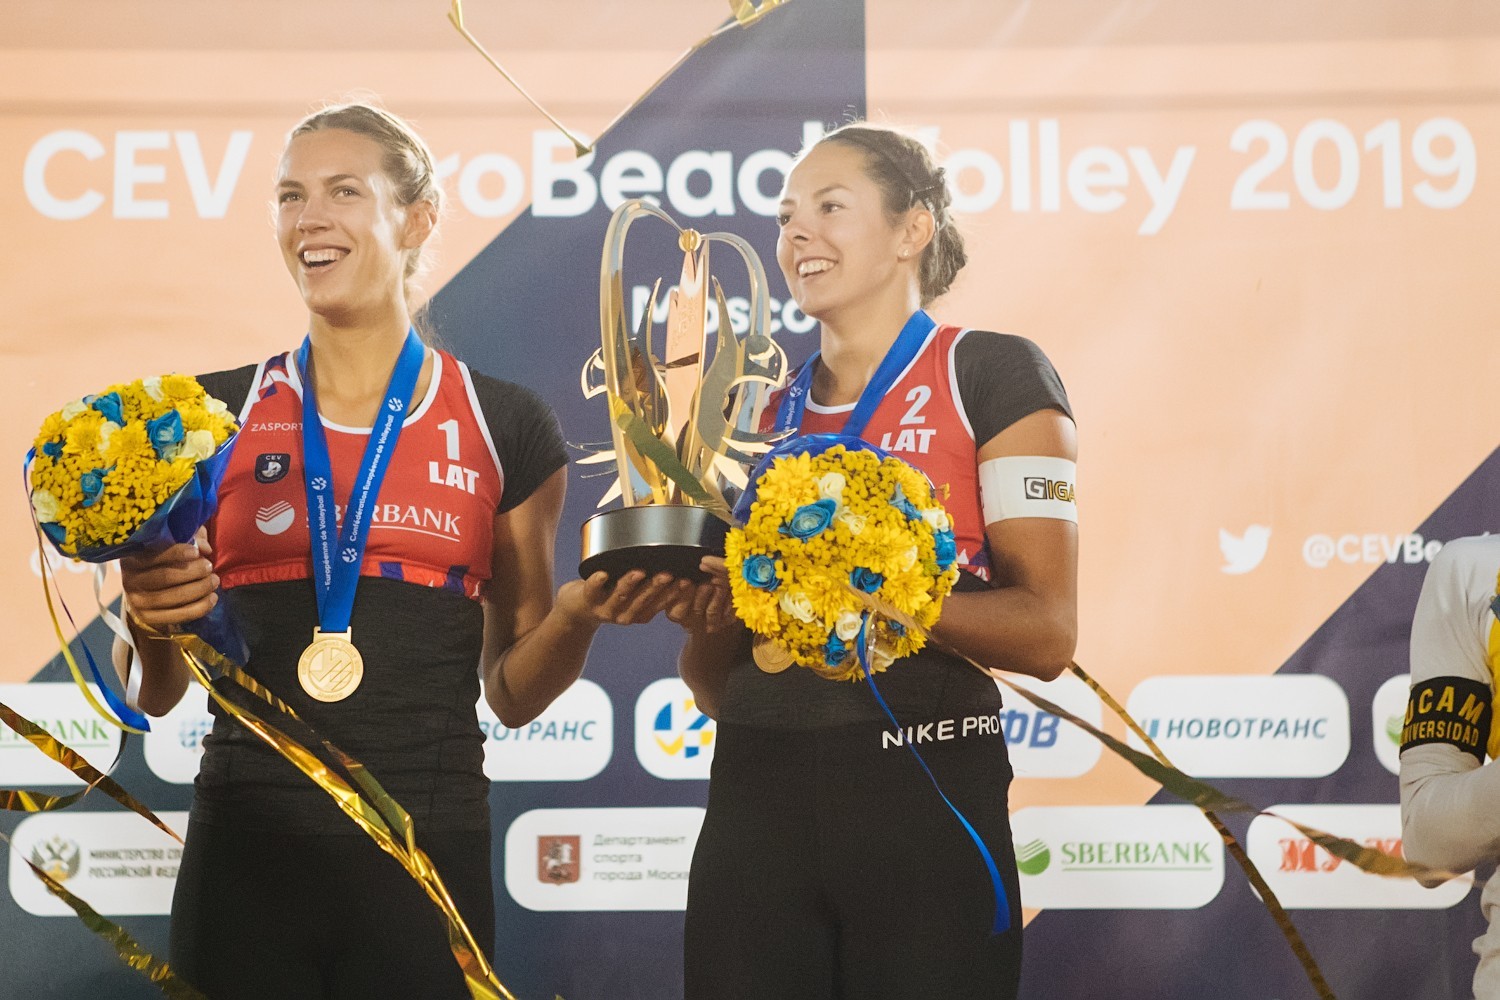 Graudina and Kravcenoka receive the gold medals and the trophy in Moscow (Photocredit: CEV)